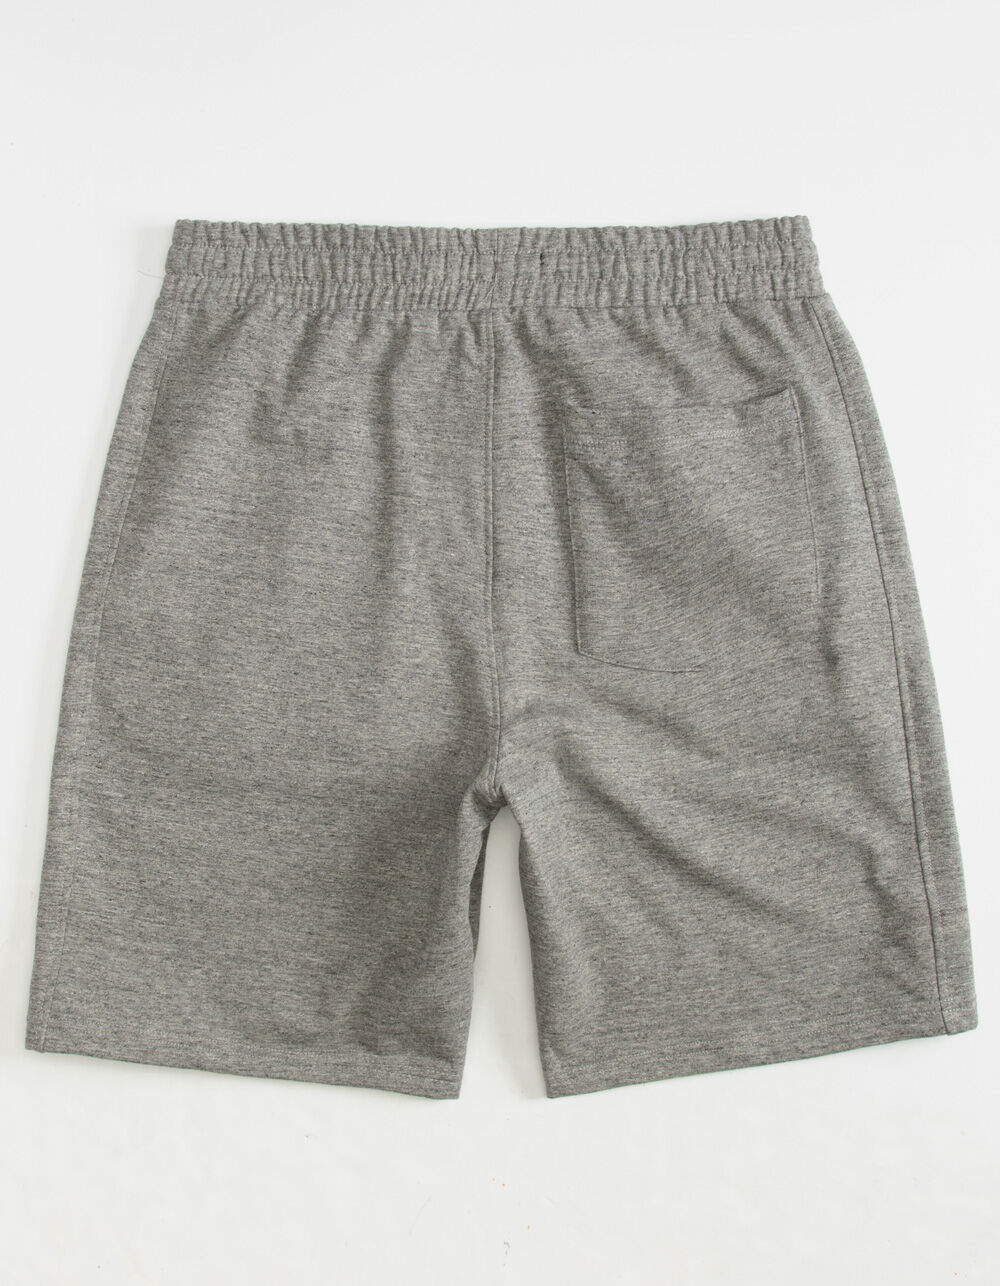 Mens HEATHER - GRAY Gray Tillys RSQ Heather Sweat | Shorts